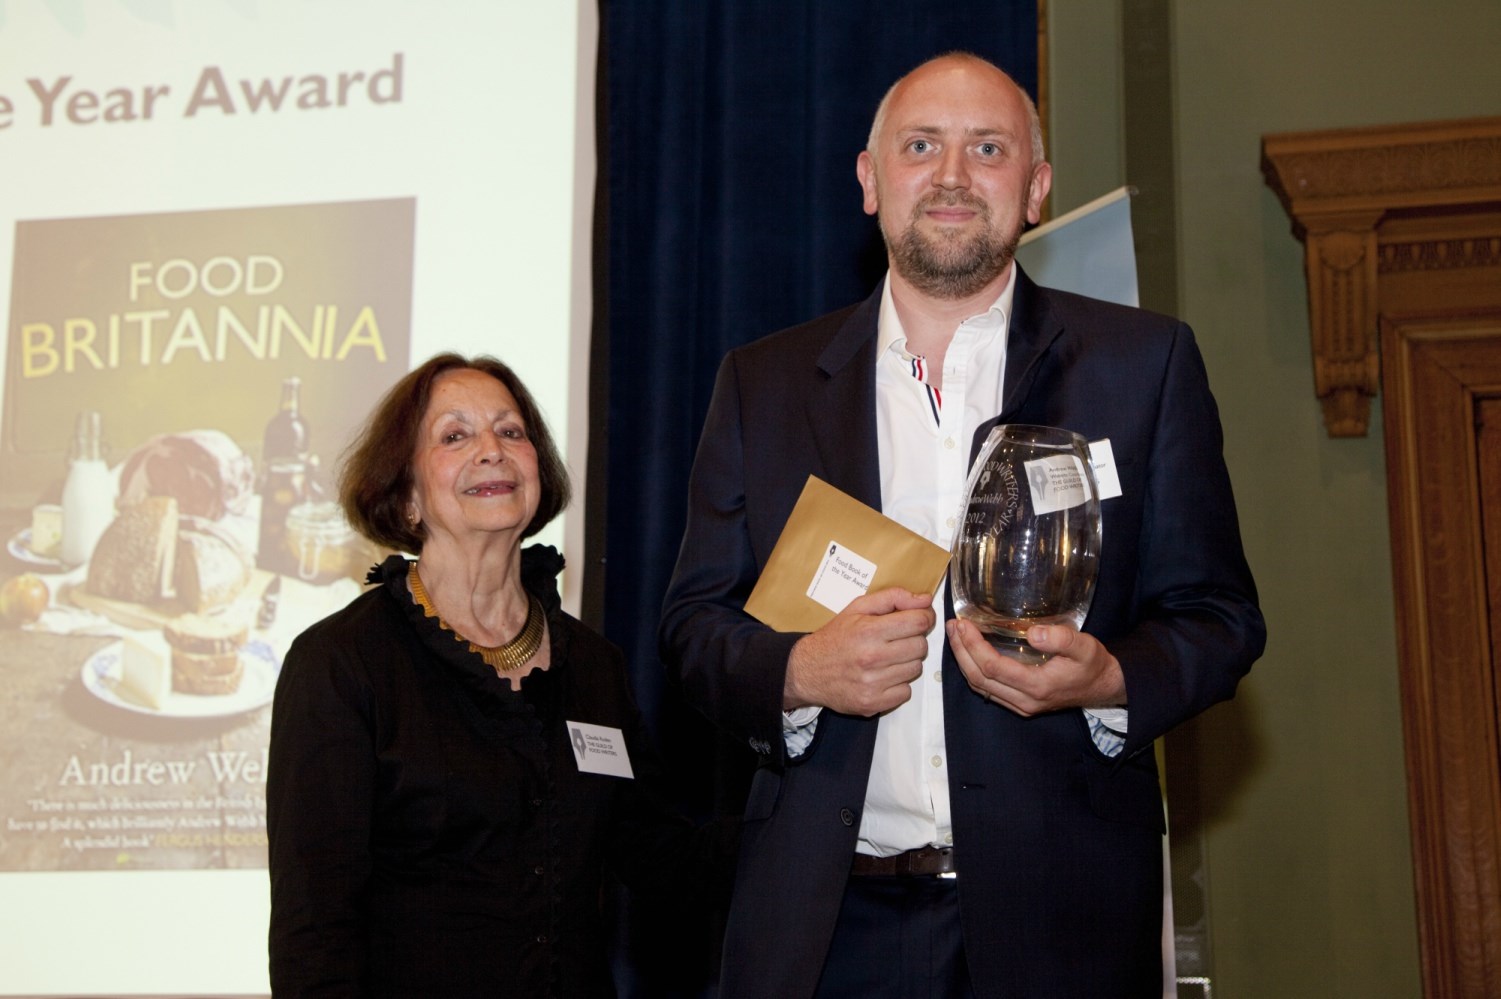 Claudia Roden presenting the Food Book of the Year Award to Andrew Webb